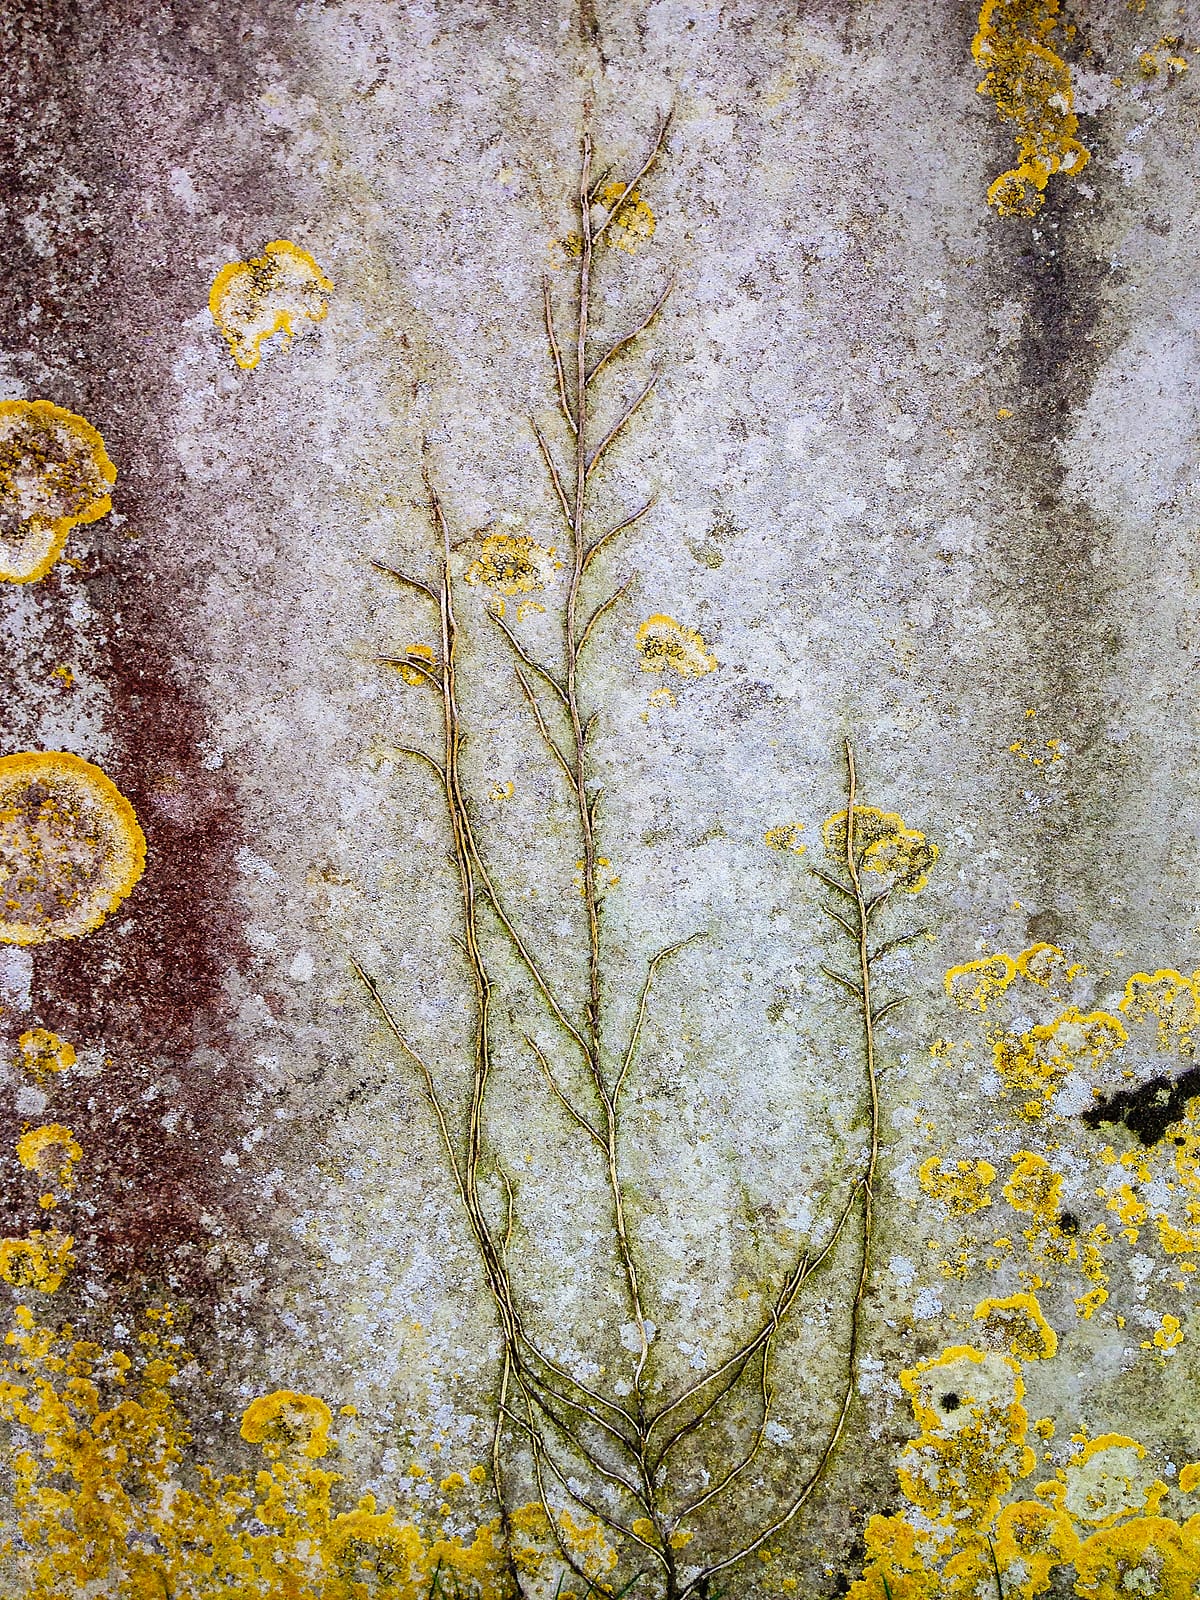 Background texture of lichen and moss growing on a gravestone